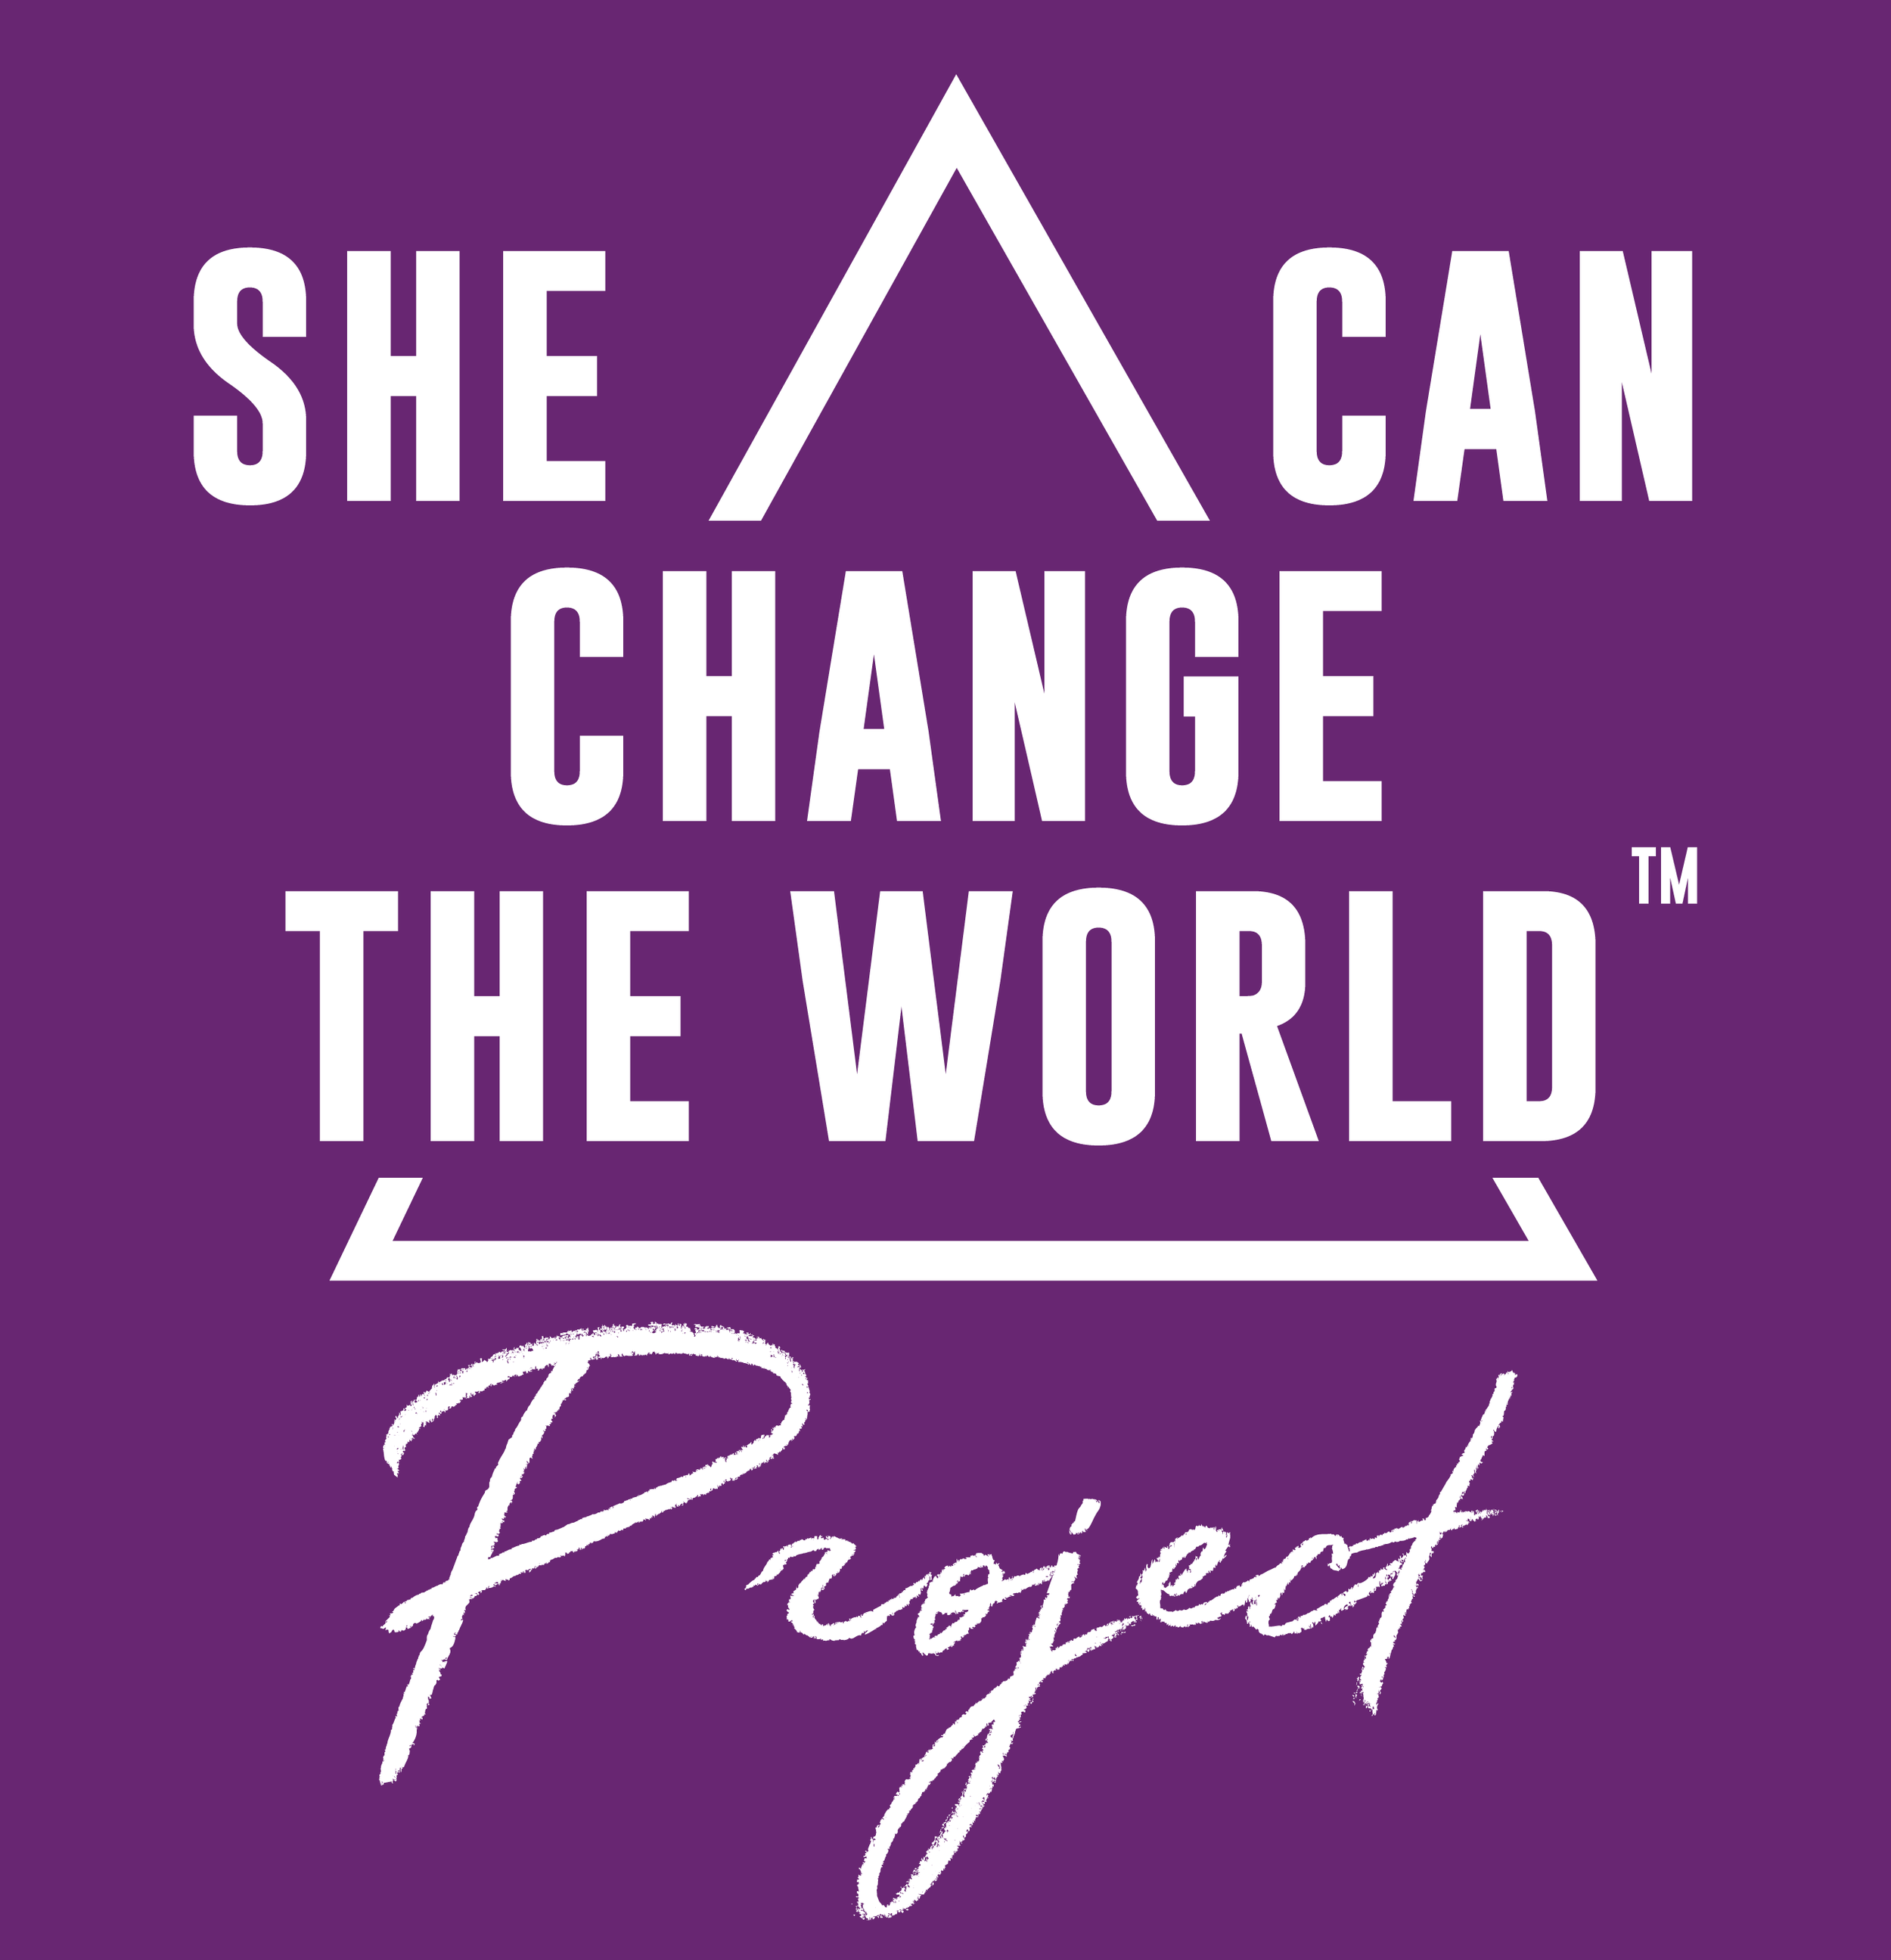 She Can Change the World_Project_purp and white_tm.png